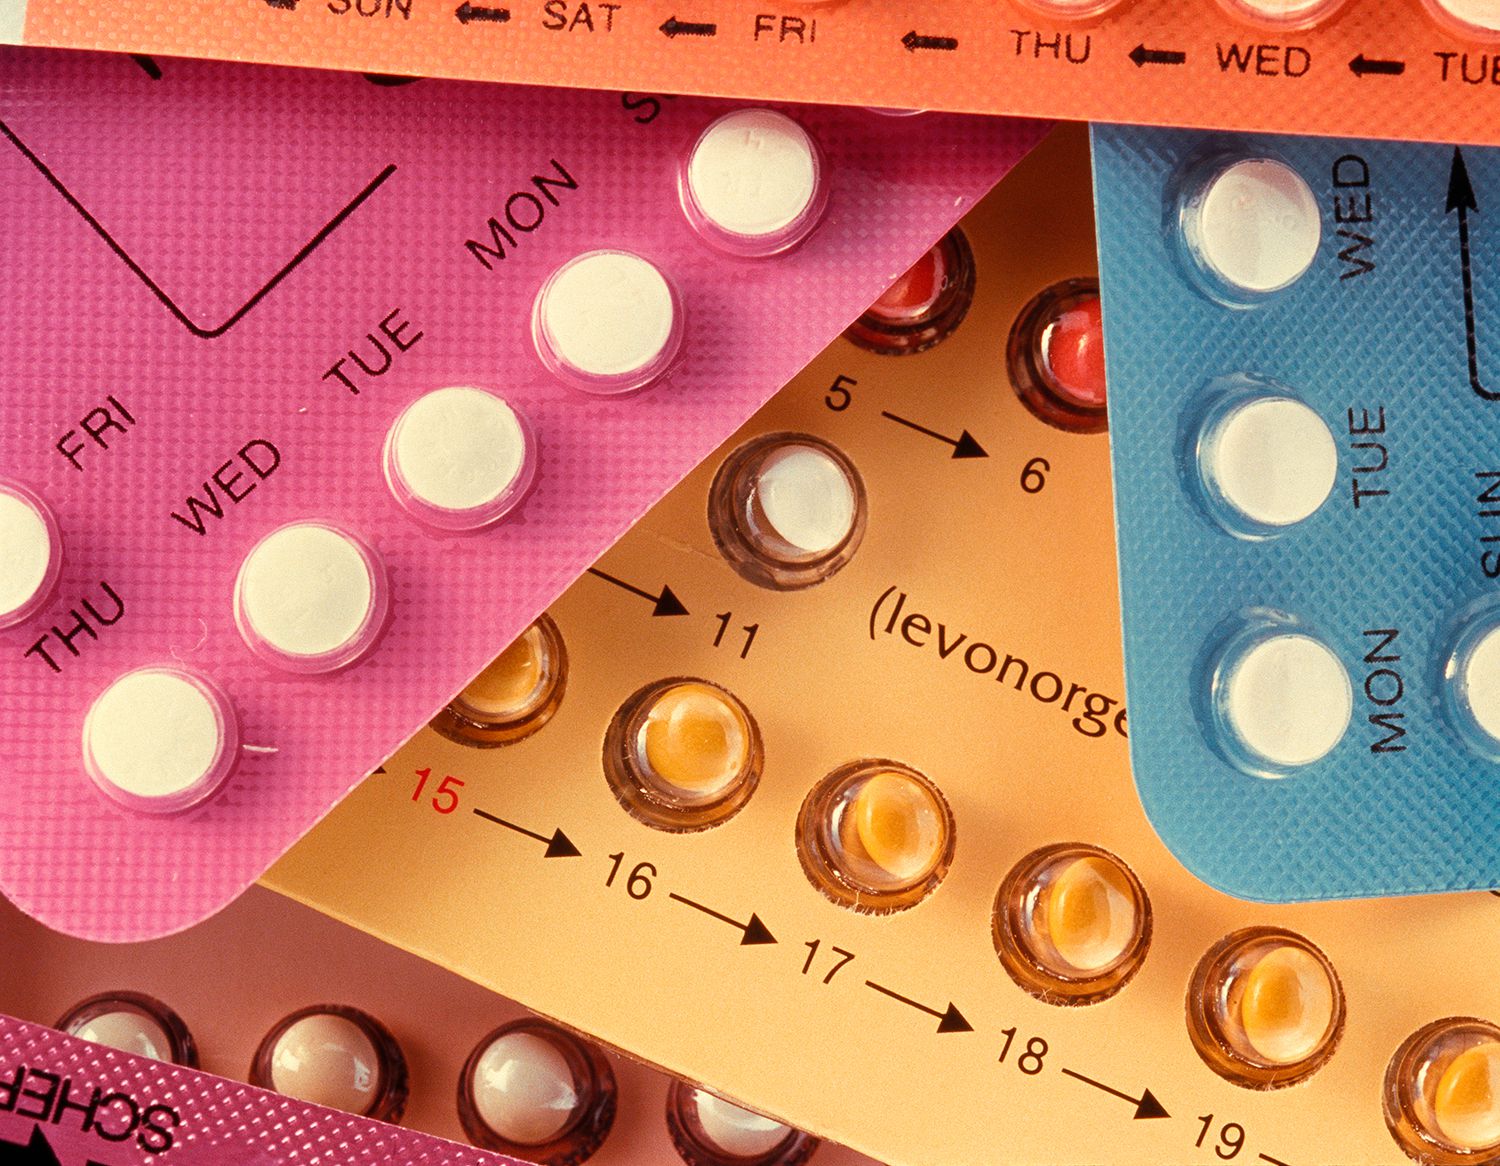 are birth control pills just take as needed